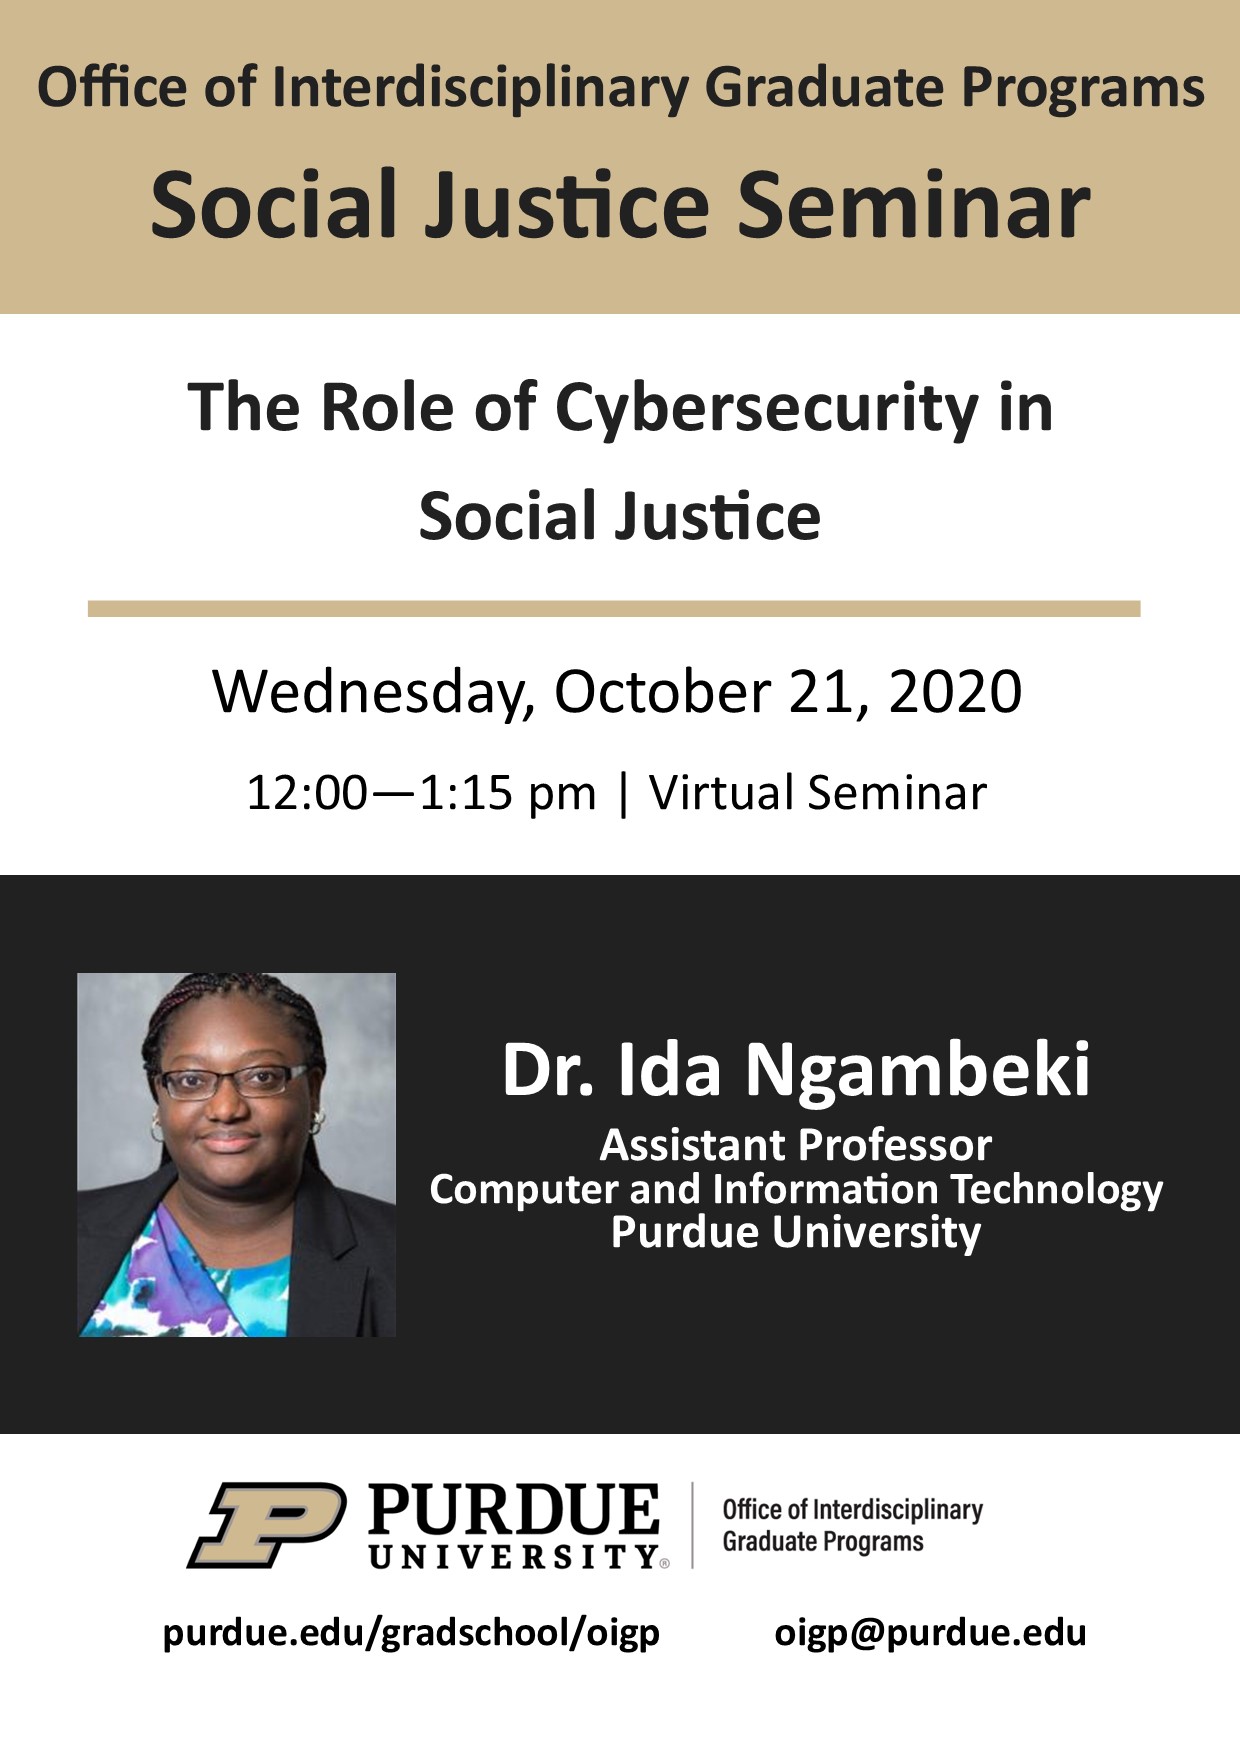 Flyer for The Role of Cybersecurity in Social Justice event